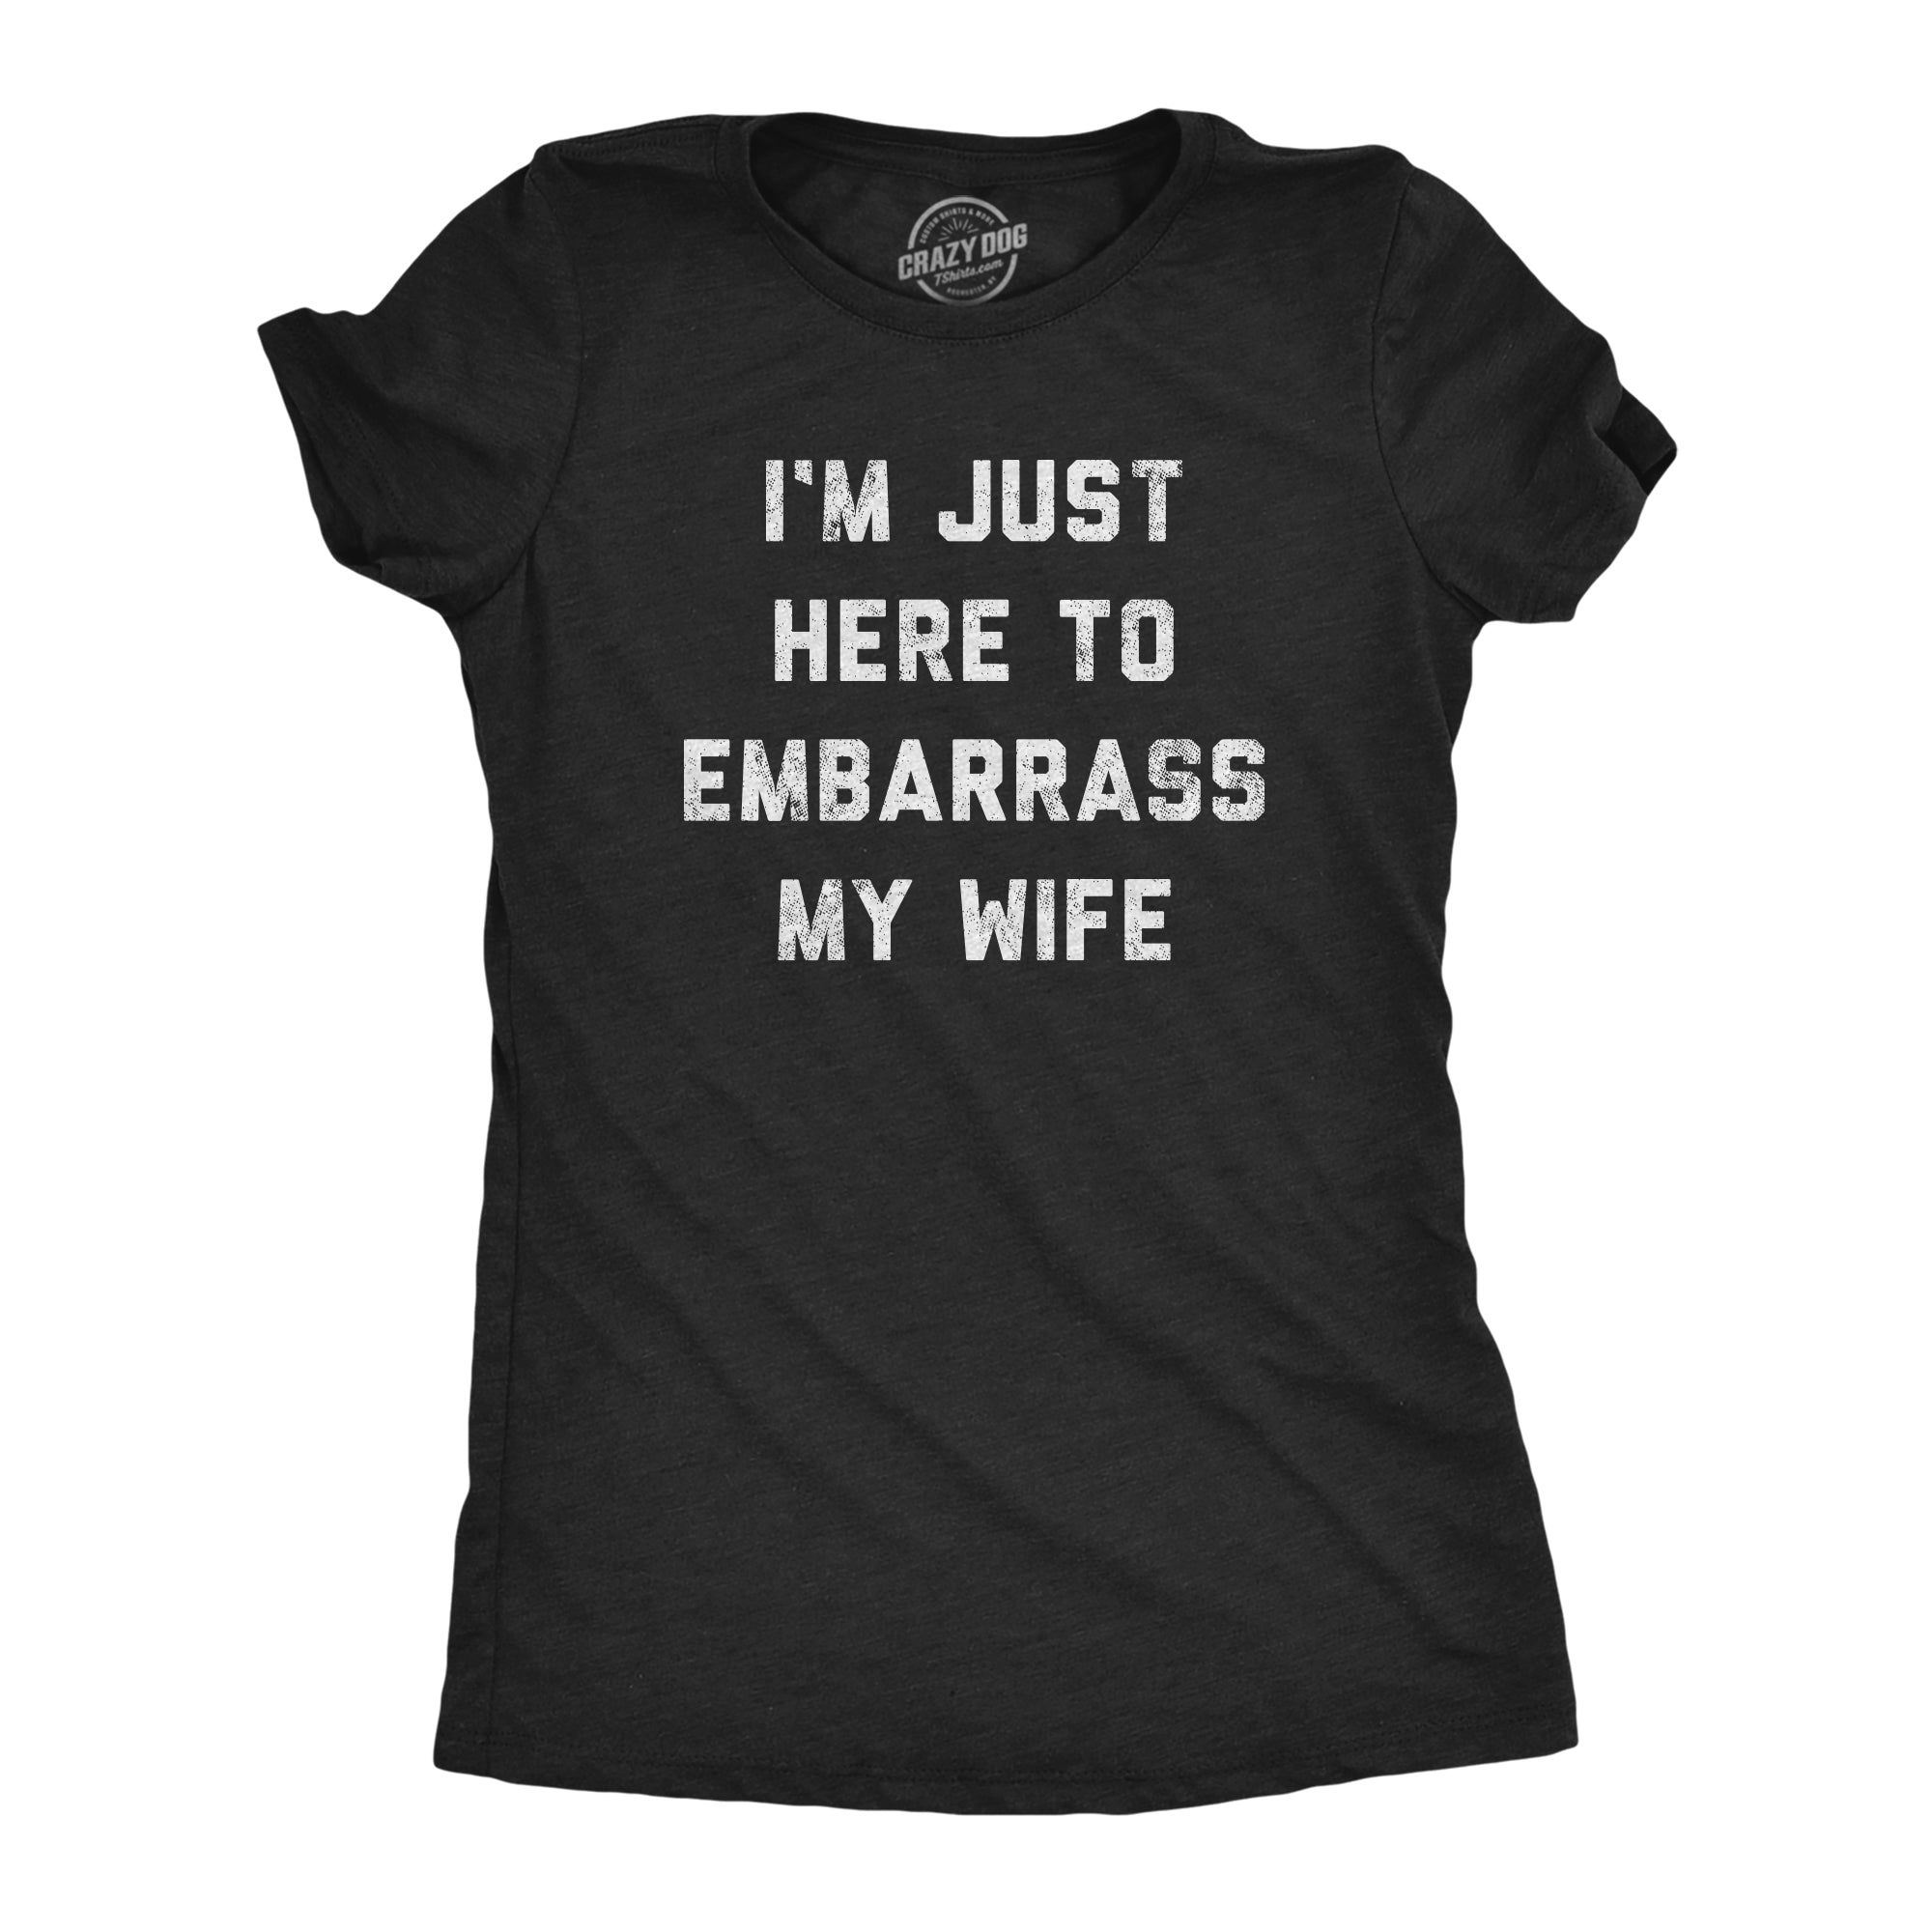 Funny Heather Black I'm Just Here To Embarrass My Wife Womens T Shirt Nerdy Mother's Day Wedding Tee